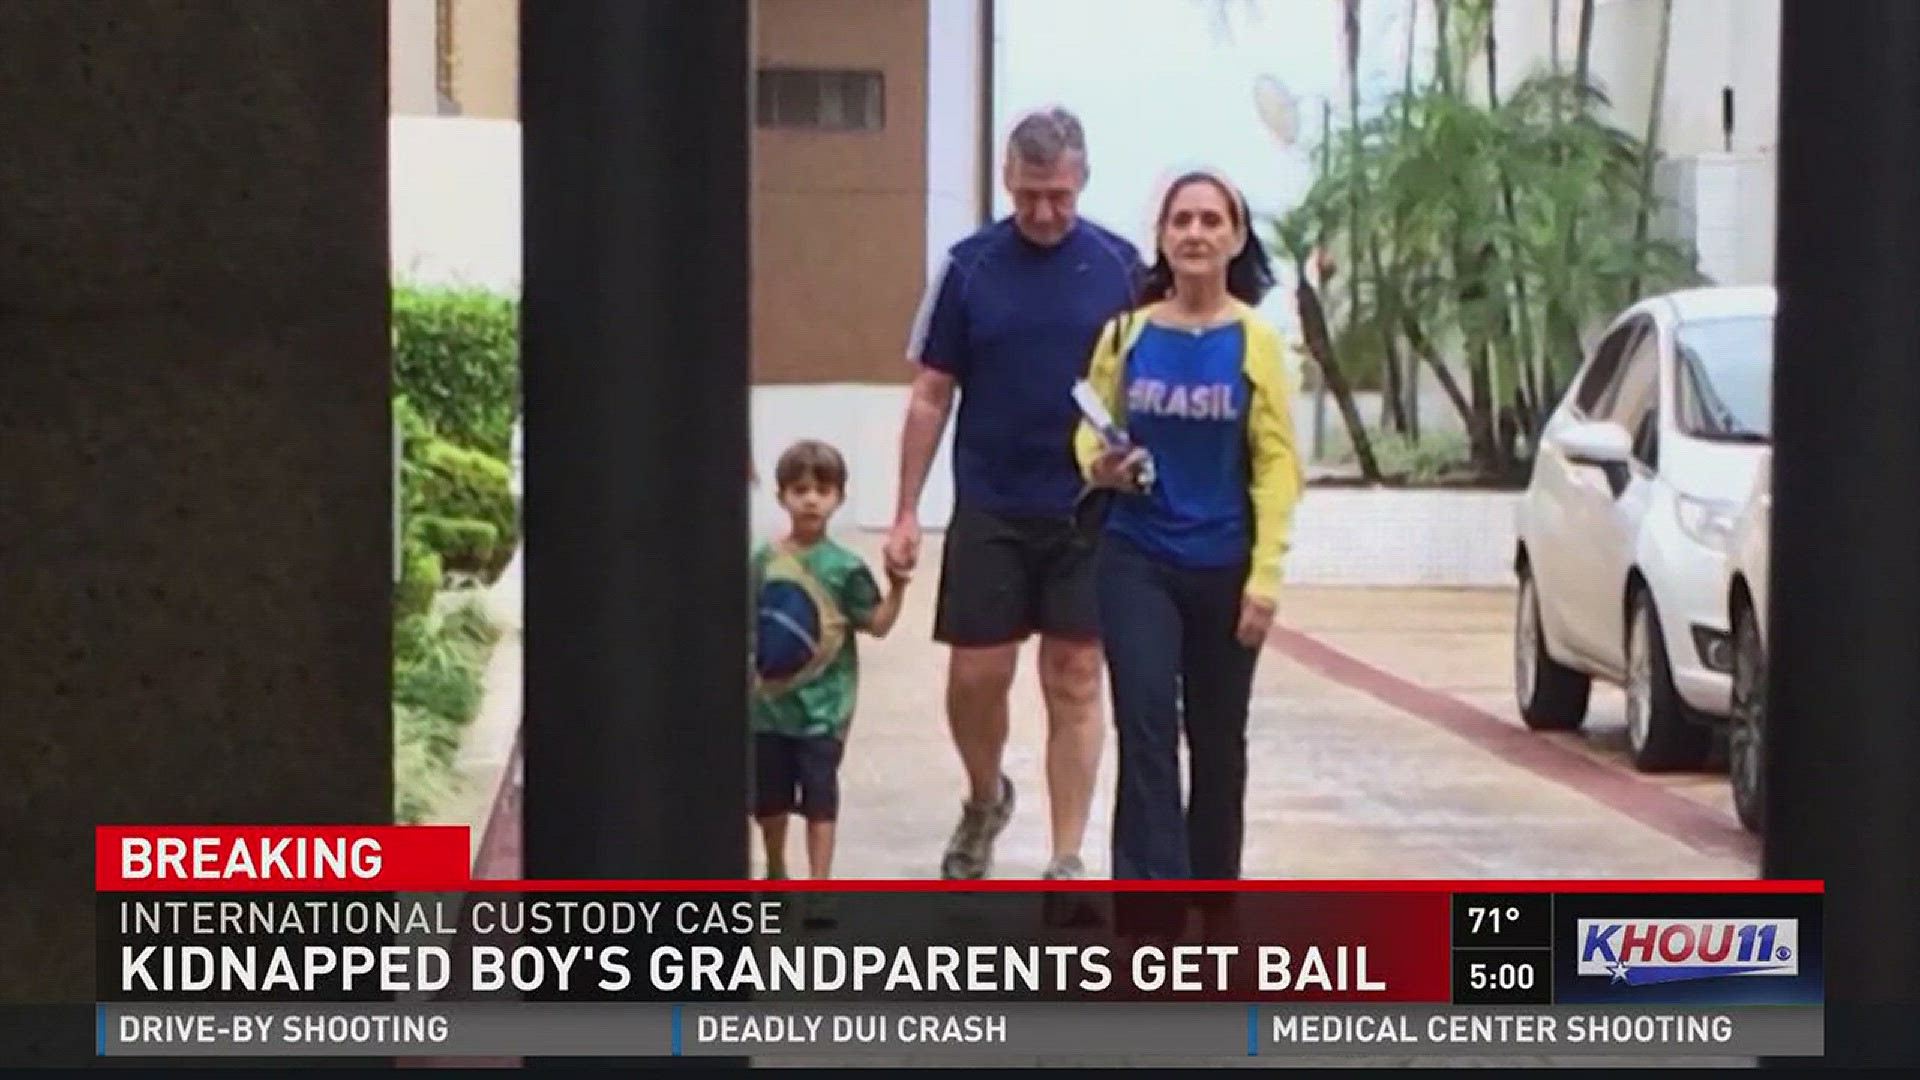 The couple accused of helping kidnap their grandson has been granted bail.